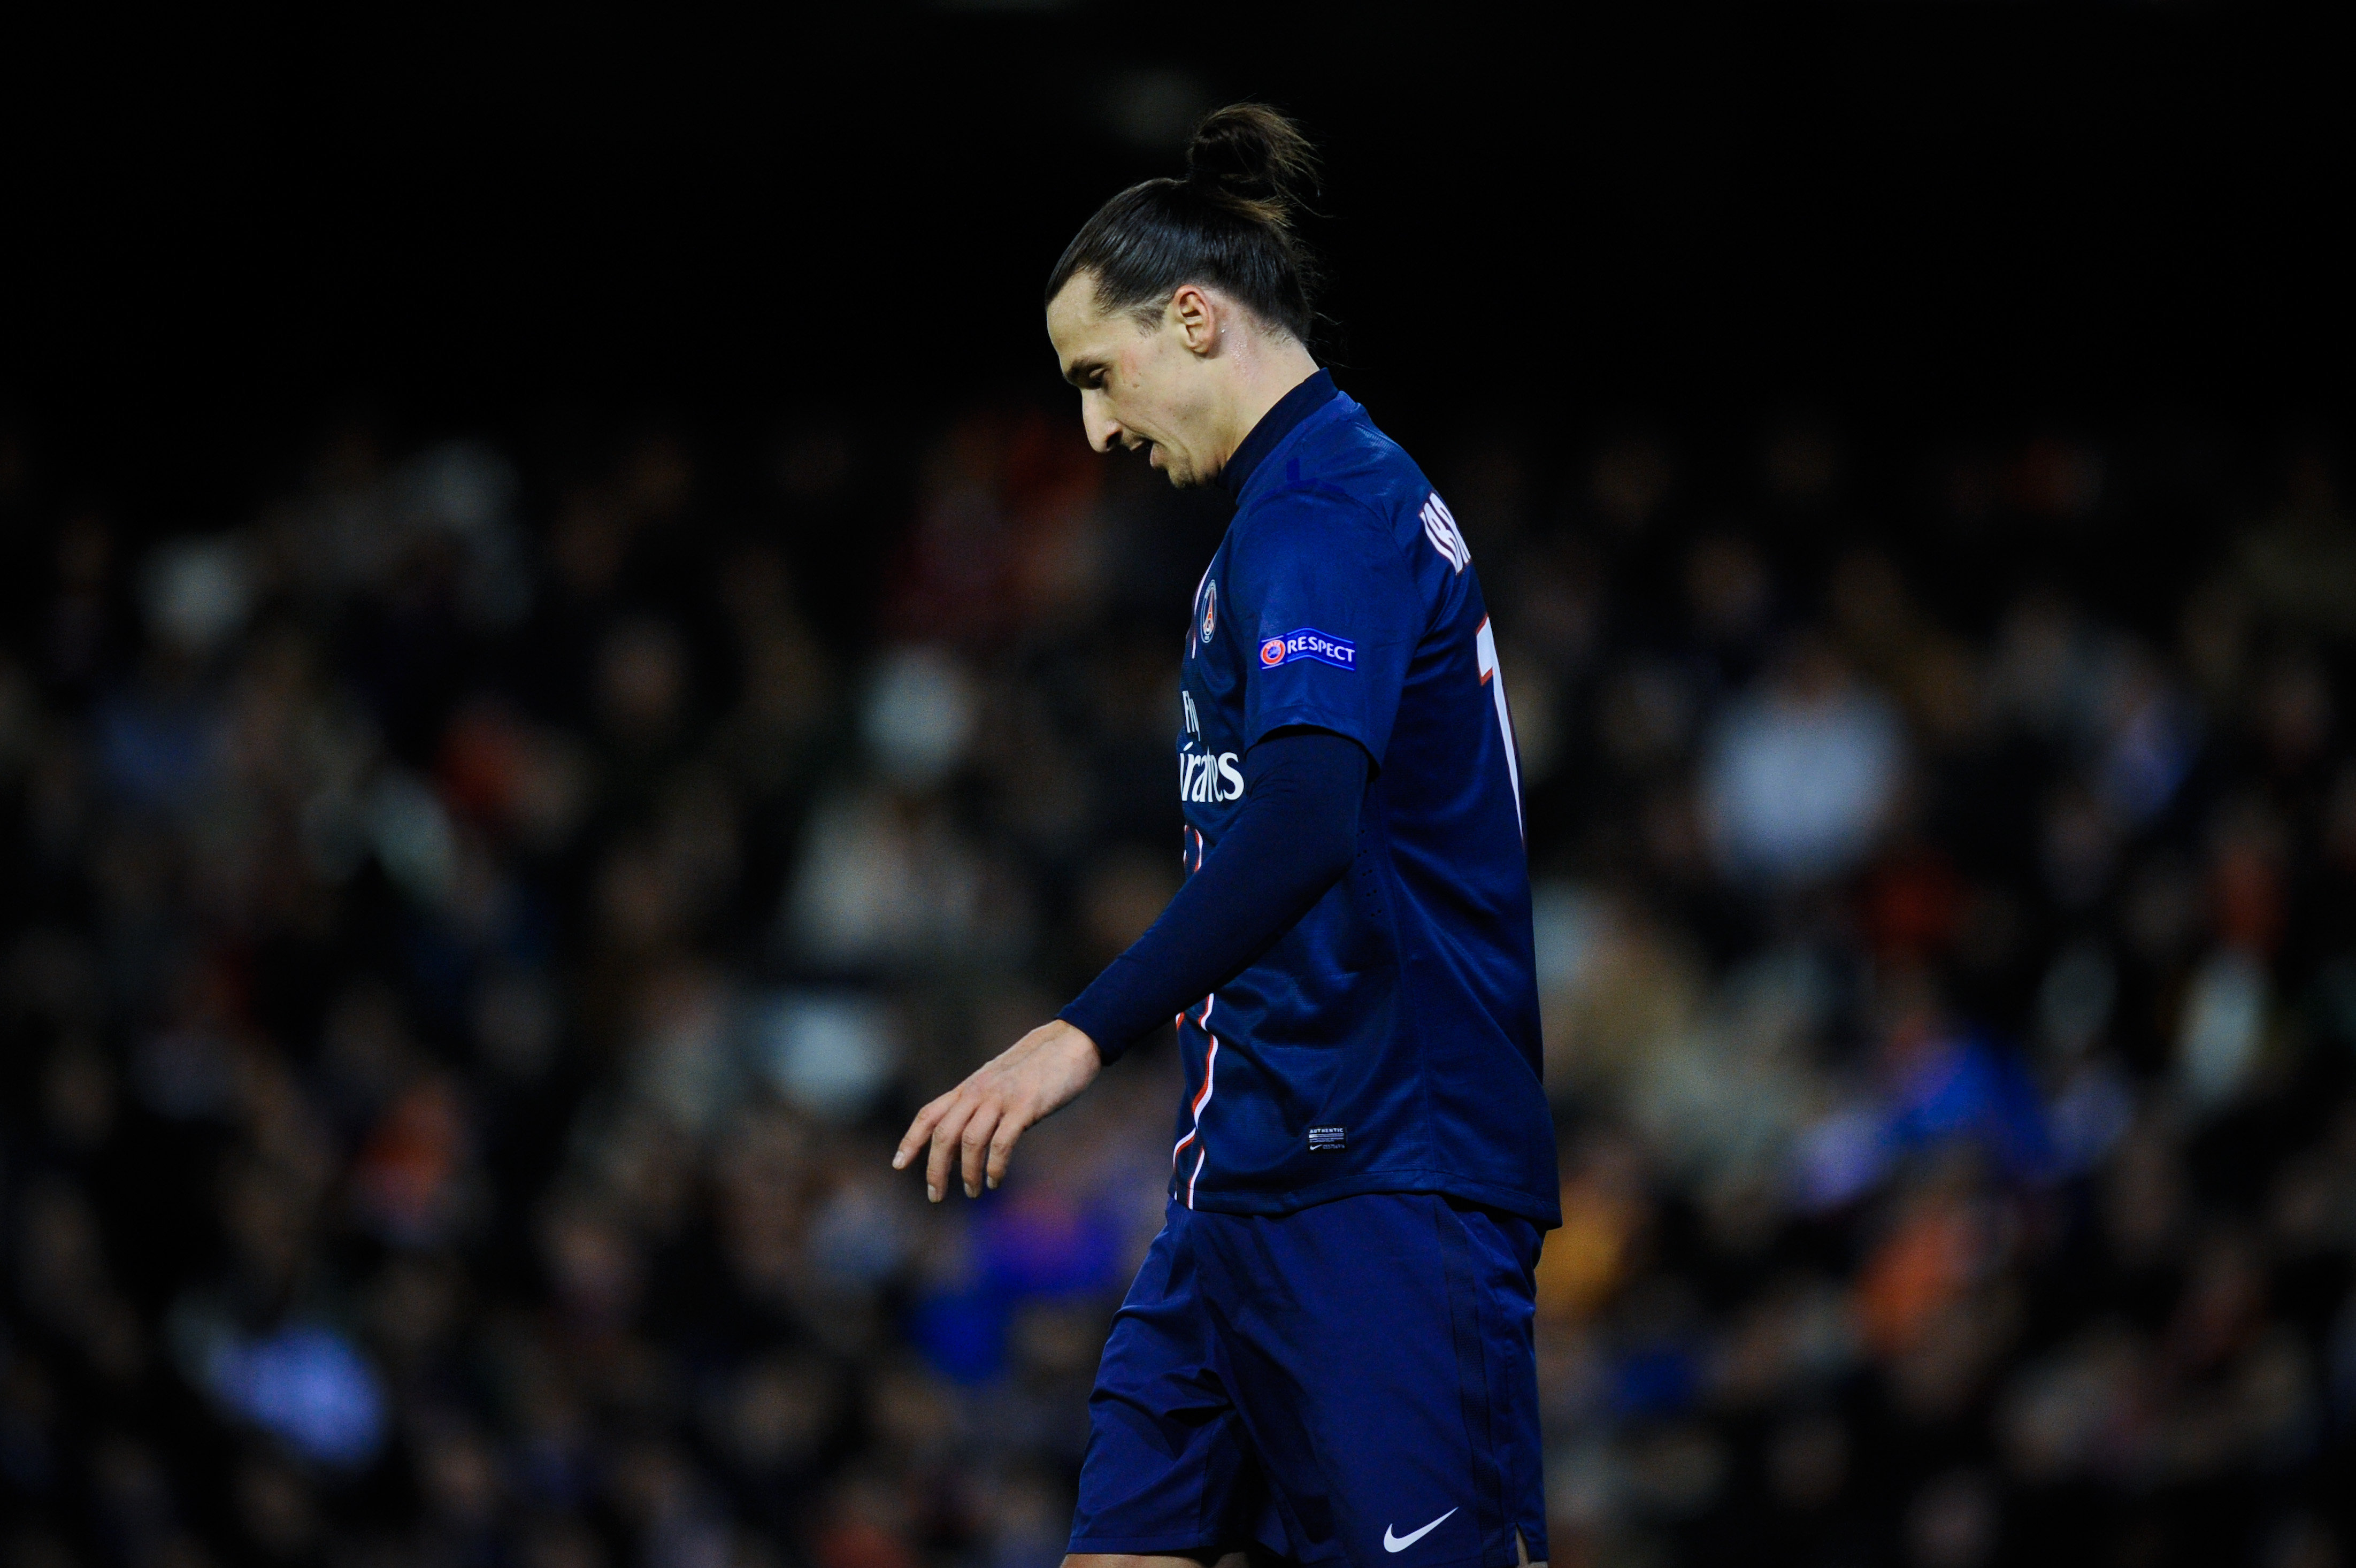 ⚽⚽ Zlatan Ibrahimovic Wallpaper Full HD APK pour Android Télécharger